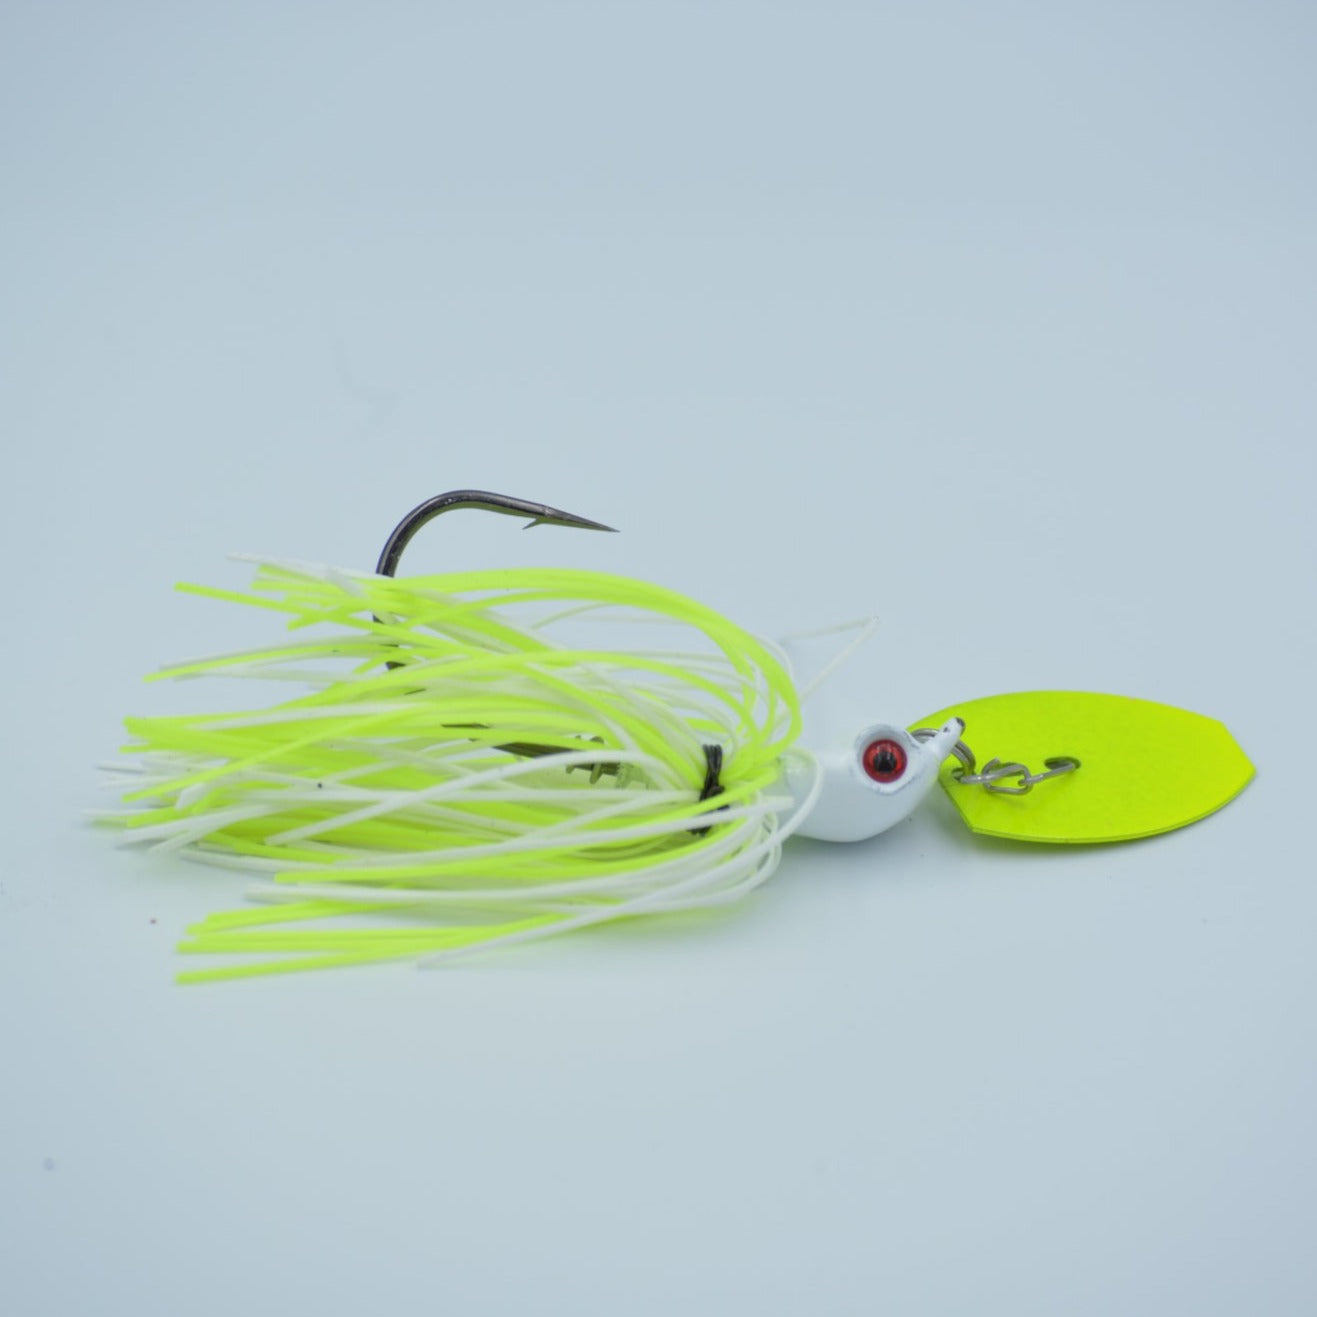 Stainless Steel Chatterbait Blade, Stainless Steel Fishing Jig Lure